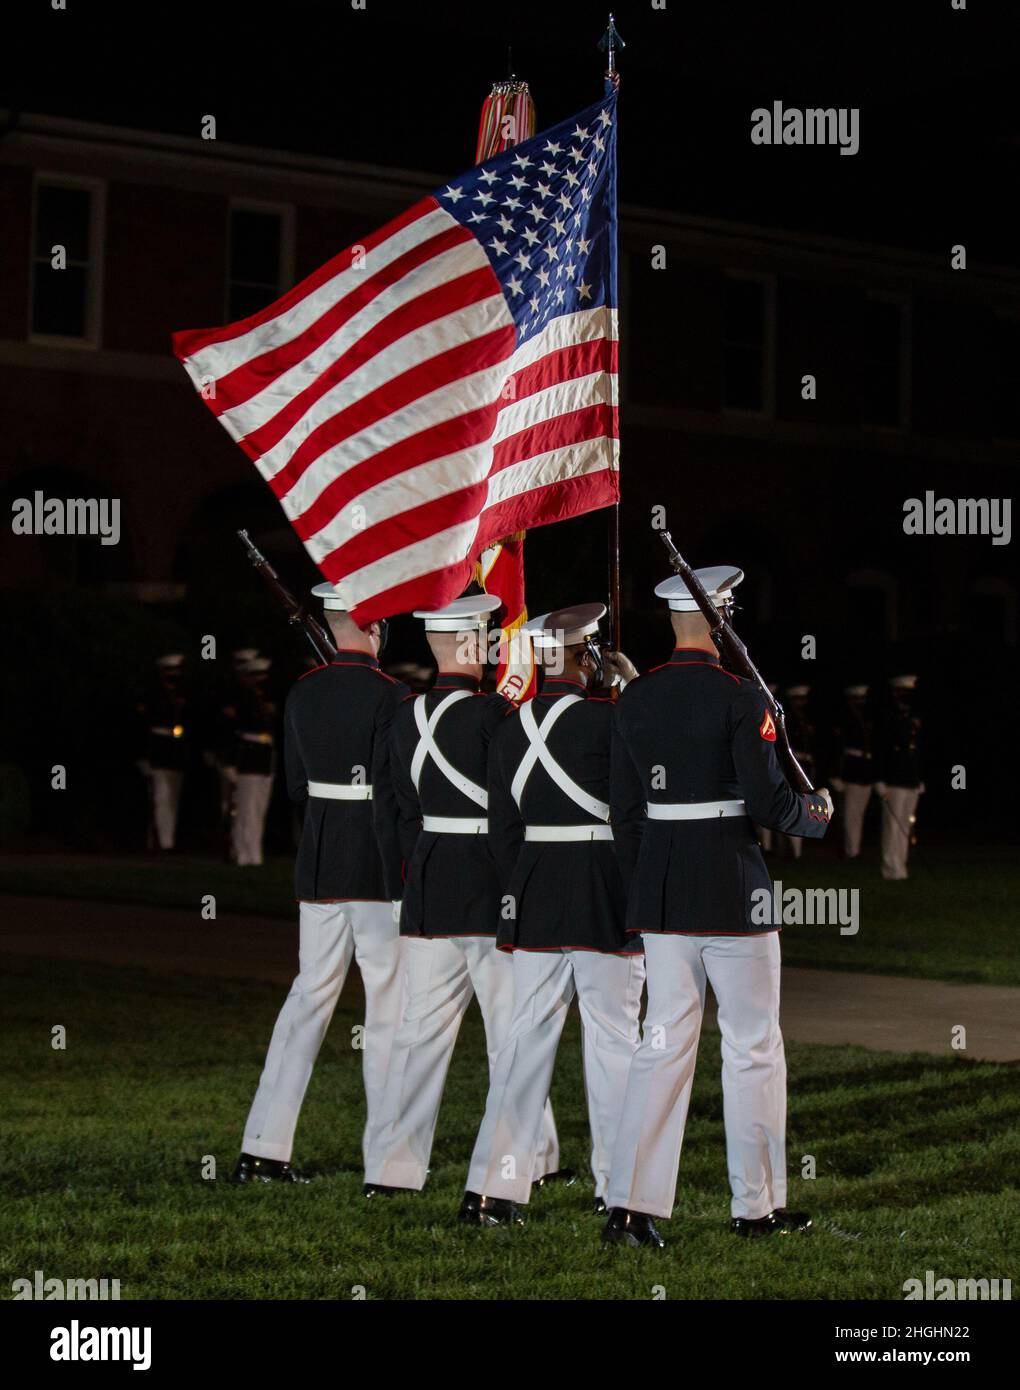 Marines with the Official Marine Corps Color Guard march across the parade deck during a Friday Evening Parade at Marine Barracks Washington, Aug. 6, 2021. The guests of honor for the evening were Chief Warrant Officer 4 Hershel W. “Woody” Williams, World War II Medal of Honor Recipient, Col. Harvey C. “Barney” Barnum, Vietnam War Medal of Honor Recipient, and Cpl. William K. “Kyle” Carpenter, Global War on Terrorism (Afghanistan) Medal of Honor Recipient, and the hosting officials were the 38th Commandant of the Marine Corps, Gen. David H. Berger, and the 19th Sergeant Major of the Marine Cor Stock Photo